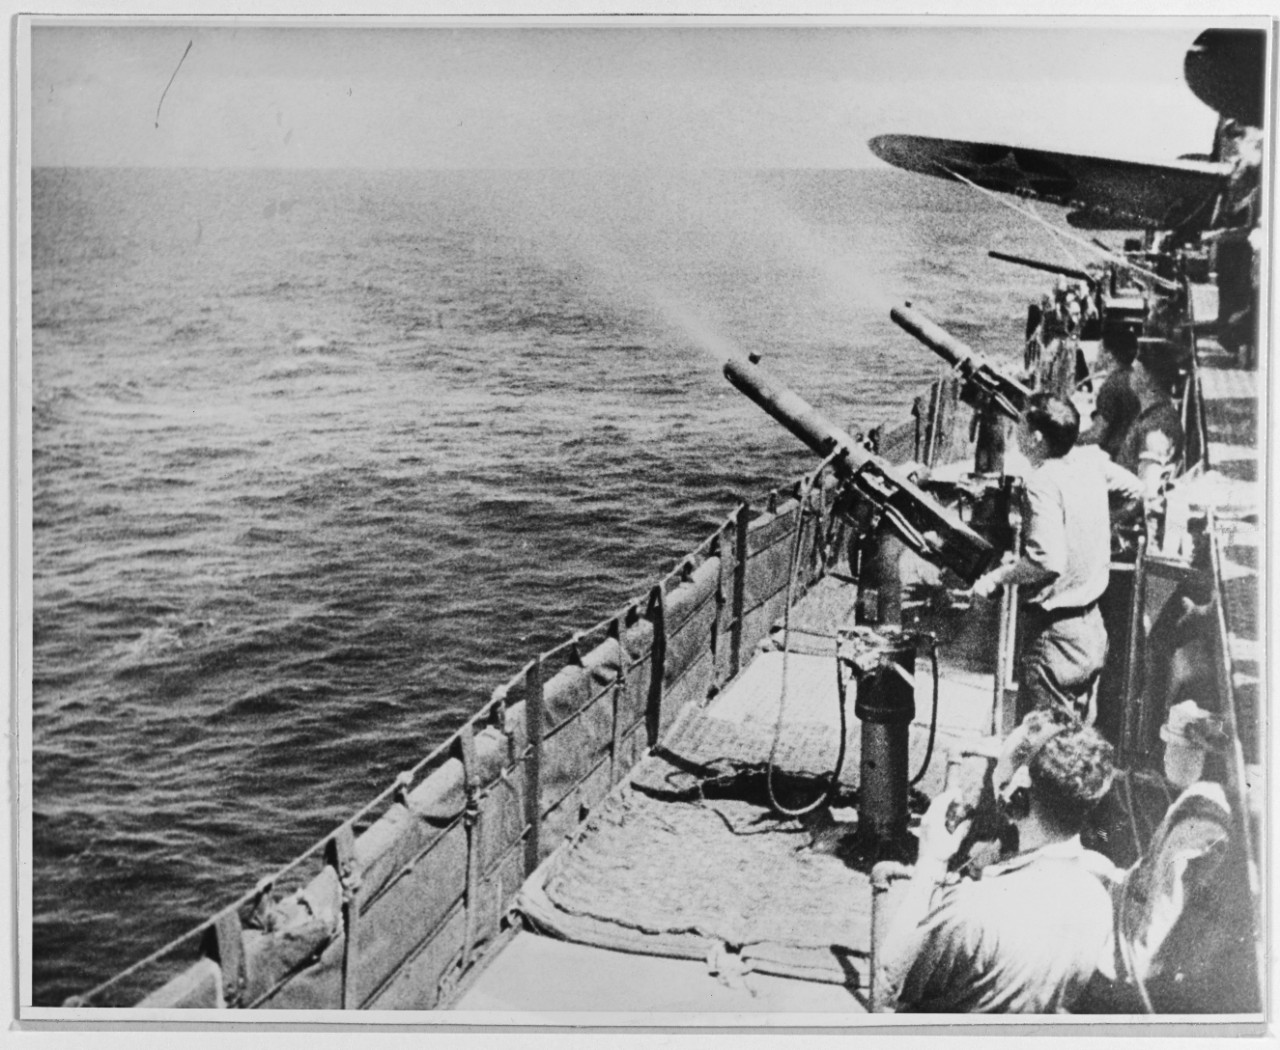 Crewmen practice firing .50 caliber machine guns, early 1942. The wing of a Dauntless is visible (right). (Naval History and Heritage Command Photograph NH 50935)